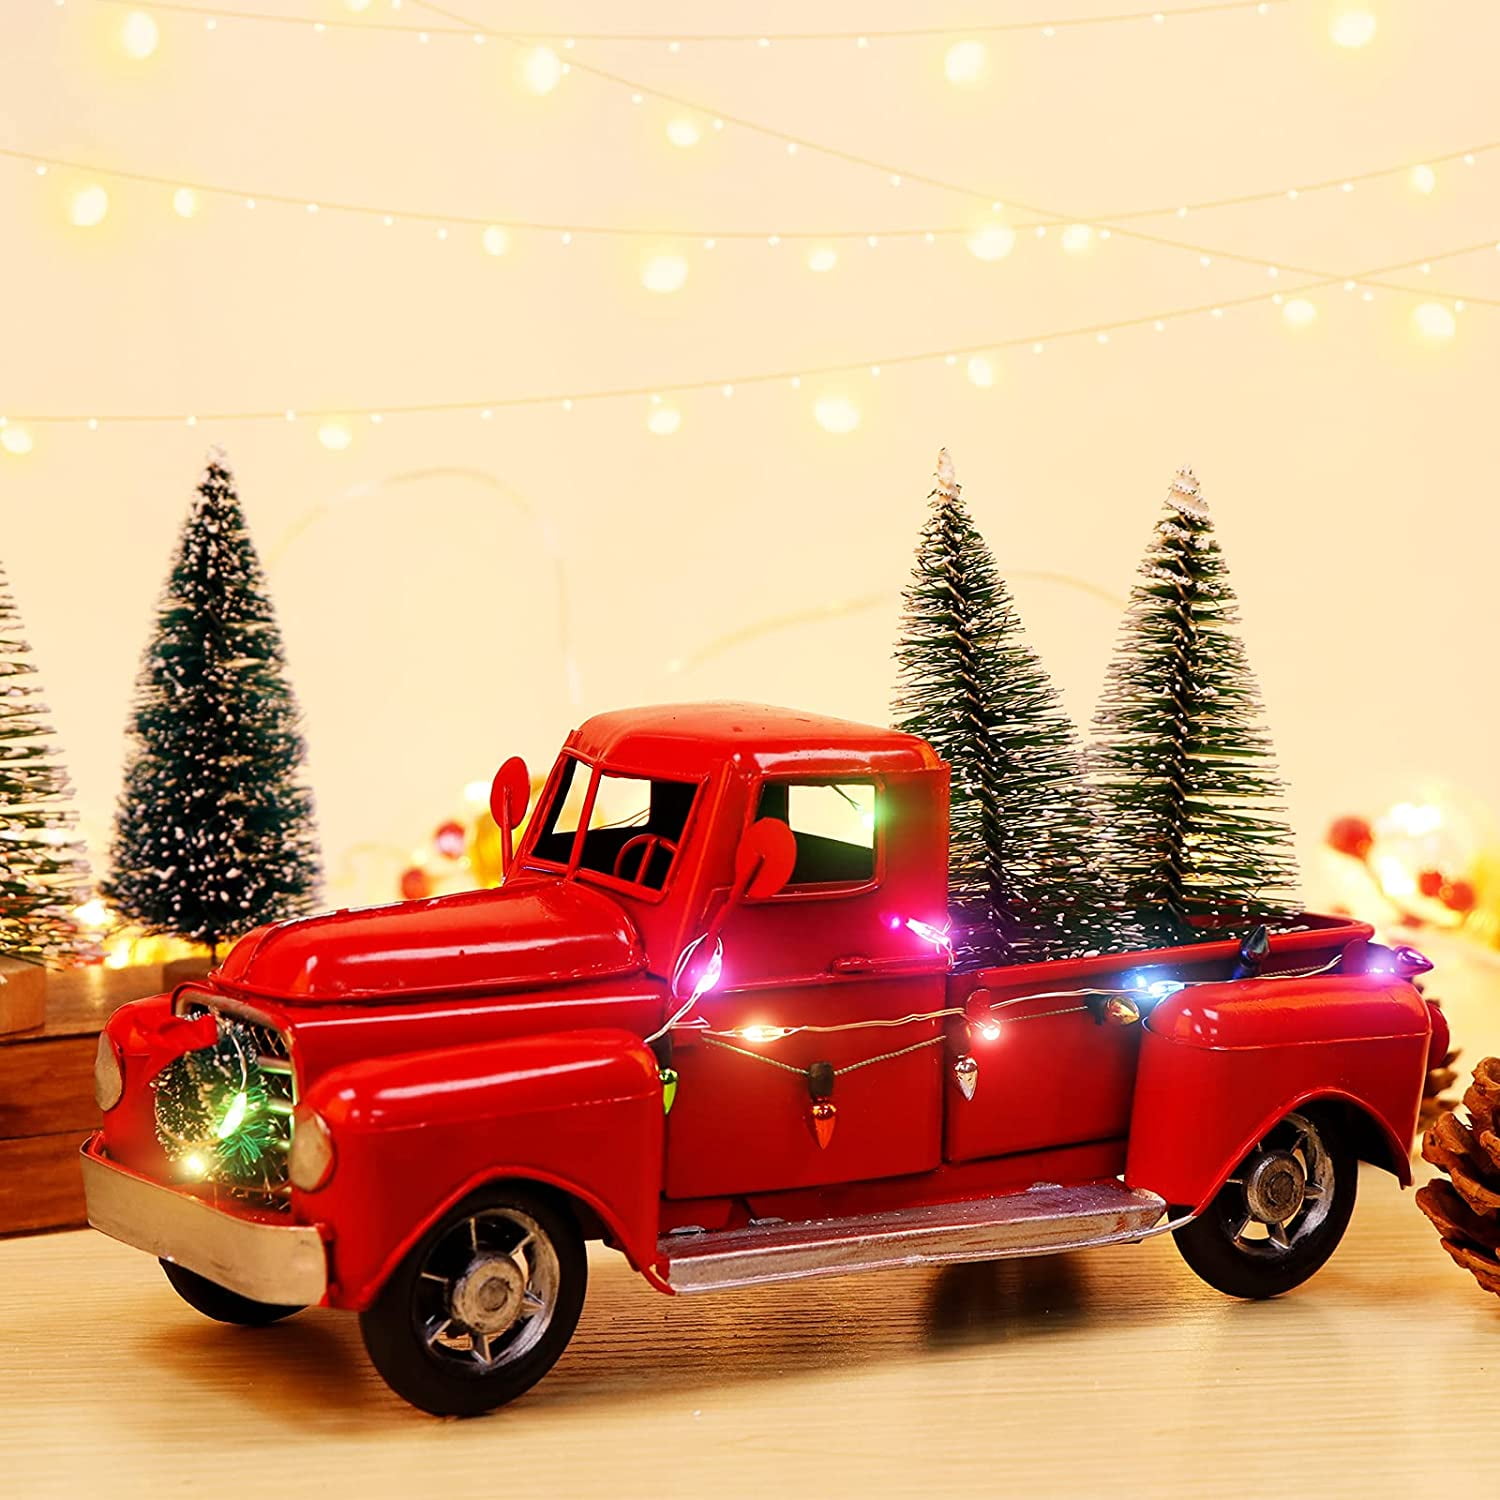 HSD Red Christmas Truck, Little Red Truck Christmas Decor with 2 ...